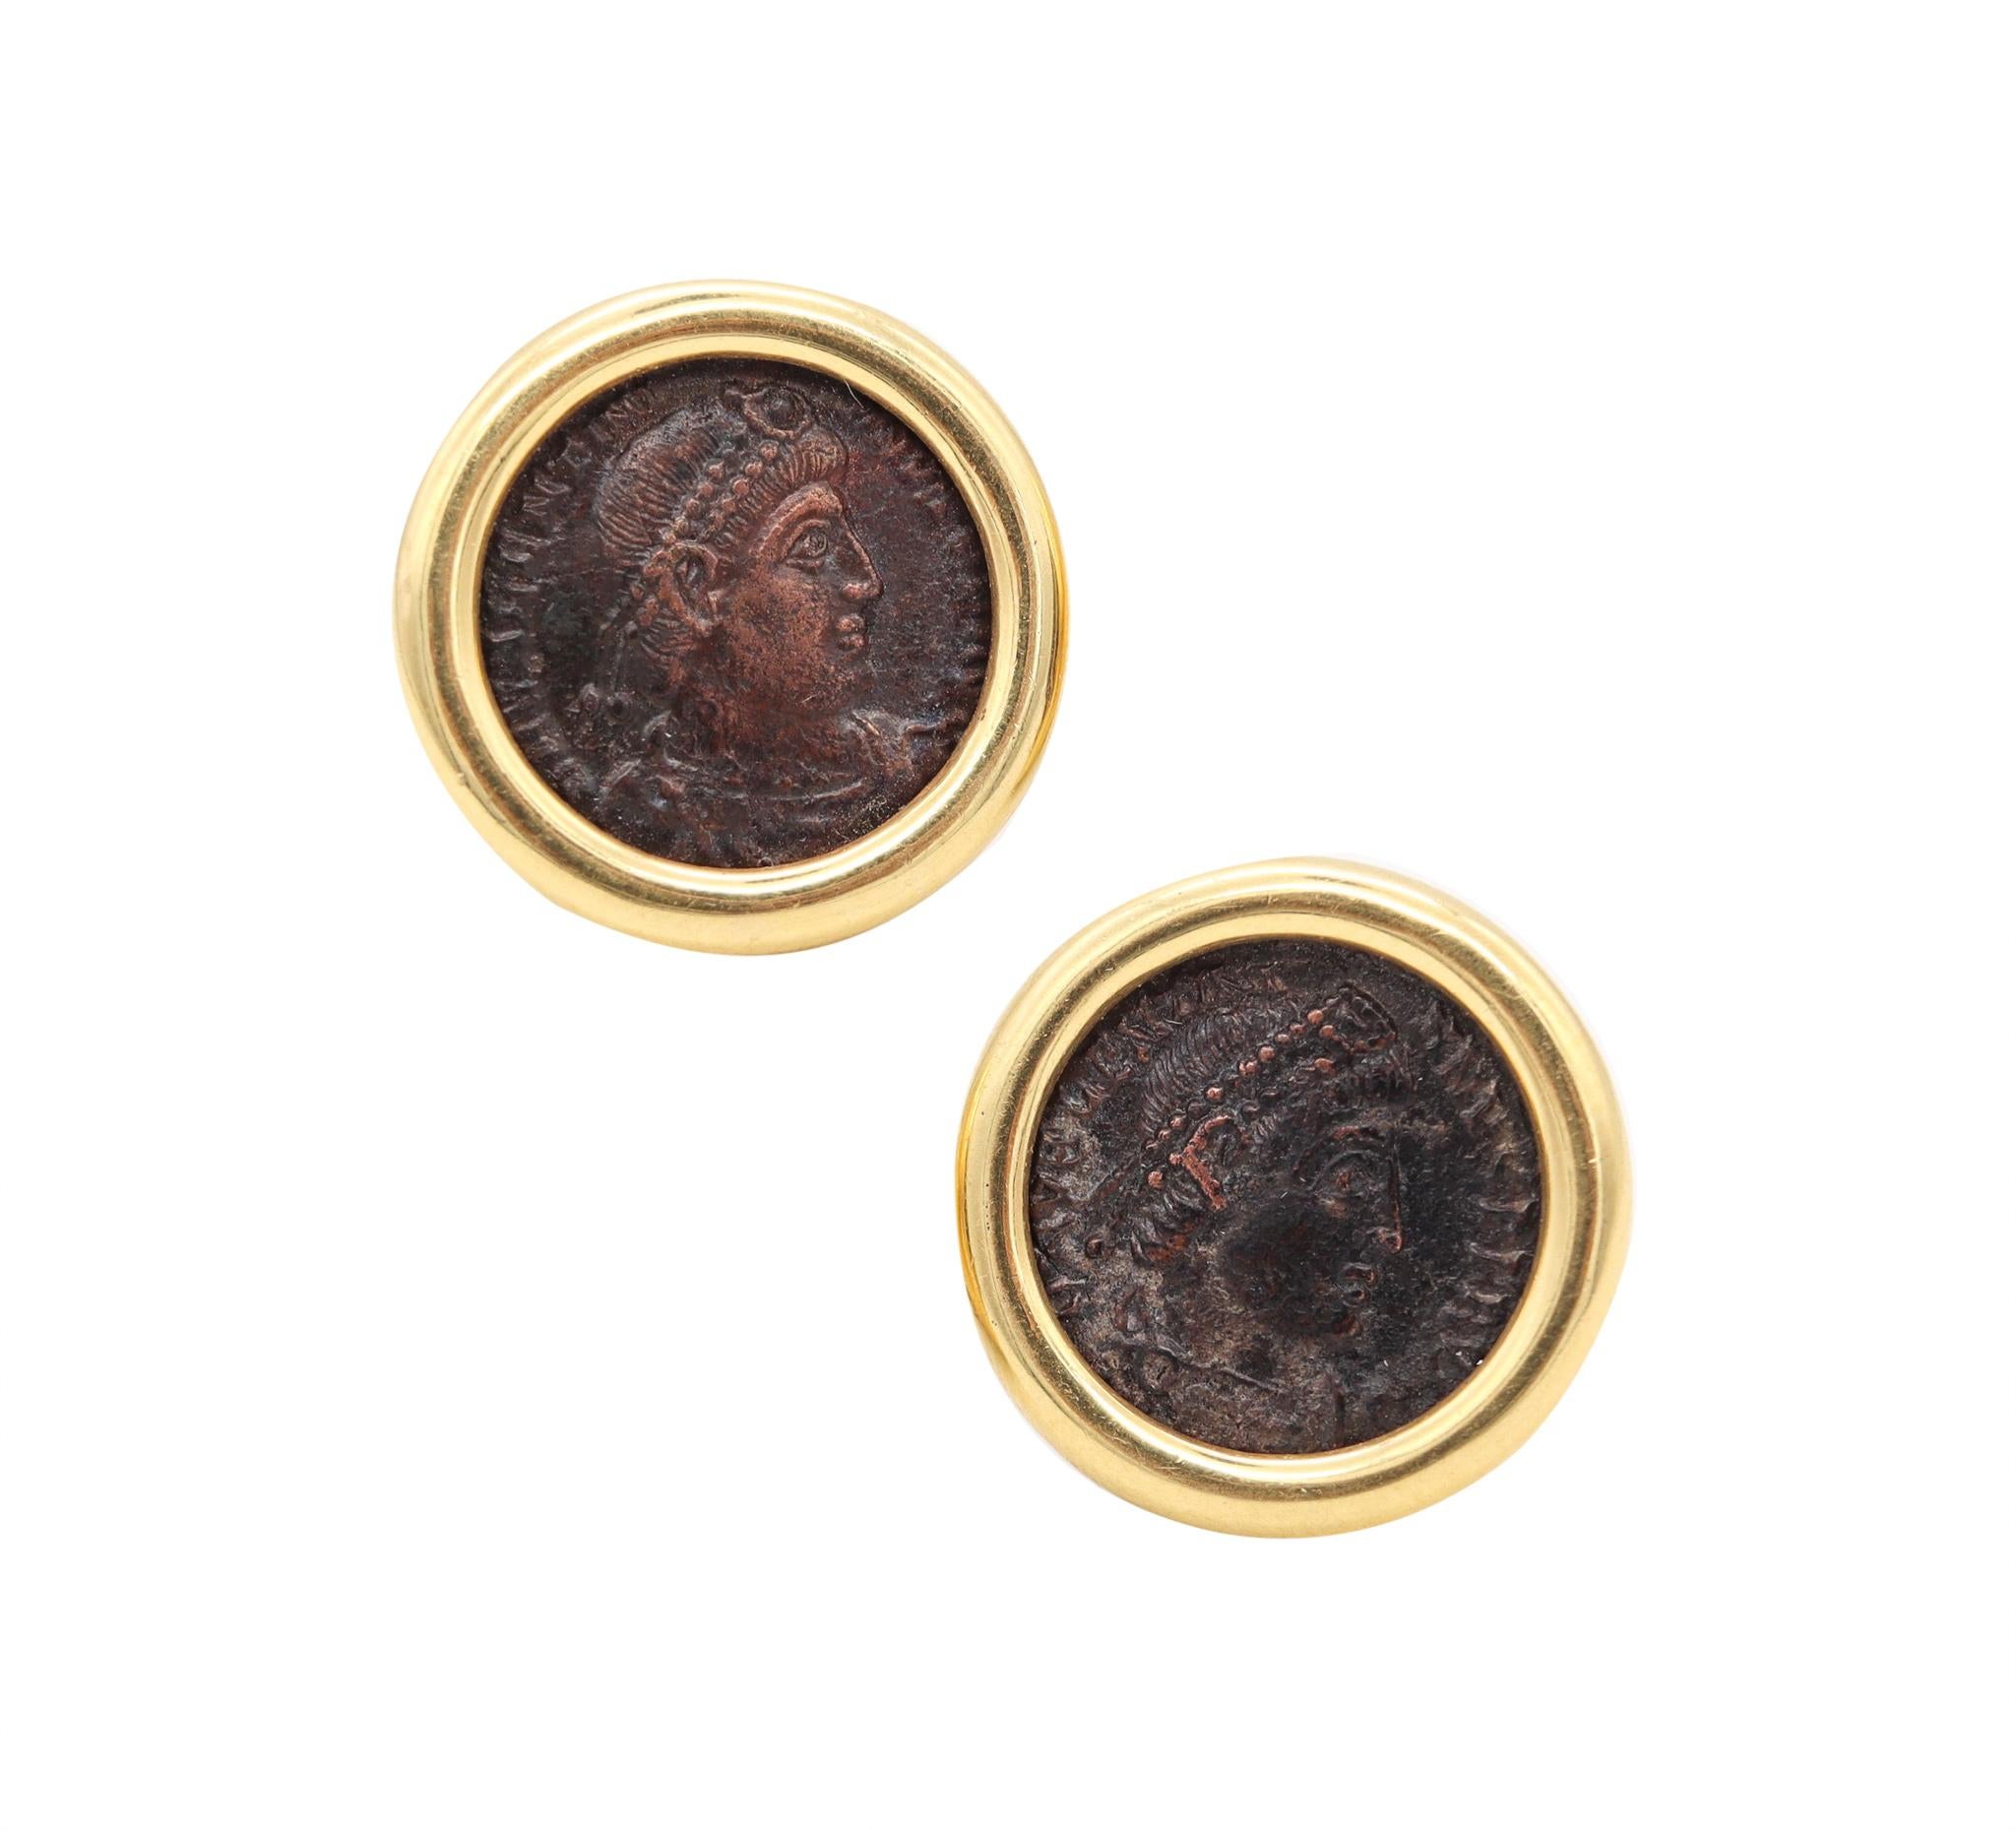 Pair of coin earrings with Ancient Romans Coins.

An elegant pair crafted in solid yellow gold of 18 karats, with high polished finish and suited at the reverse, with posts for pierced ears and hinged omega backs for fastening clips.

They are